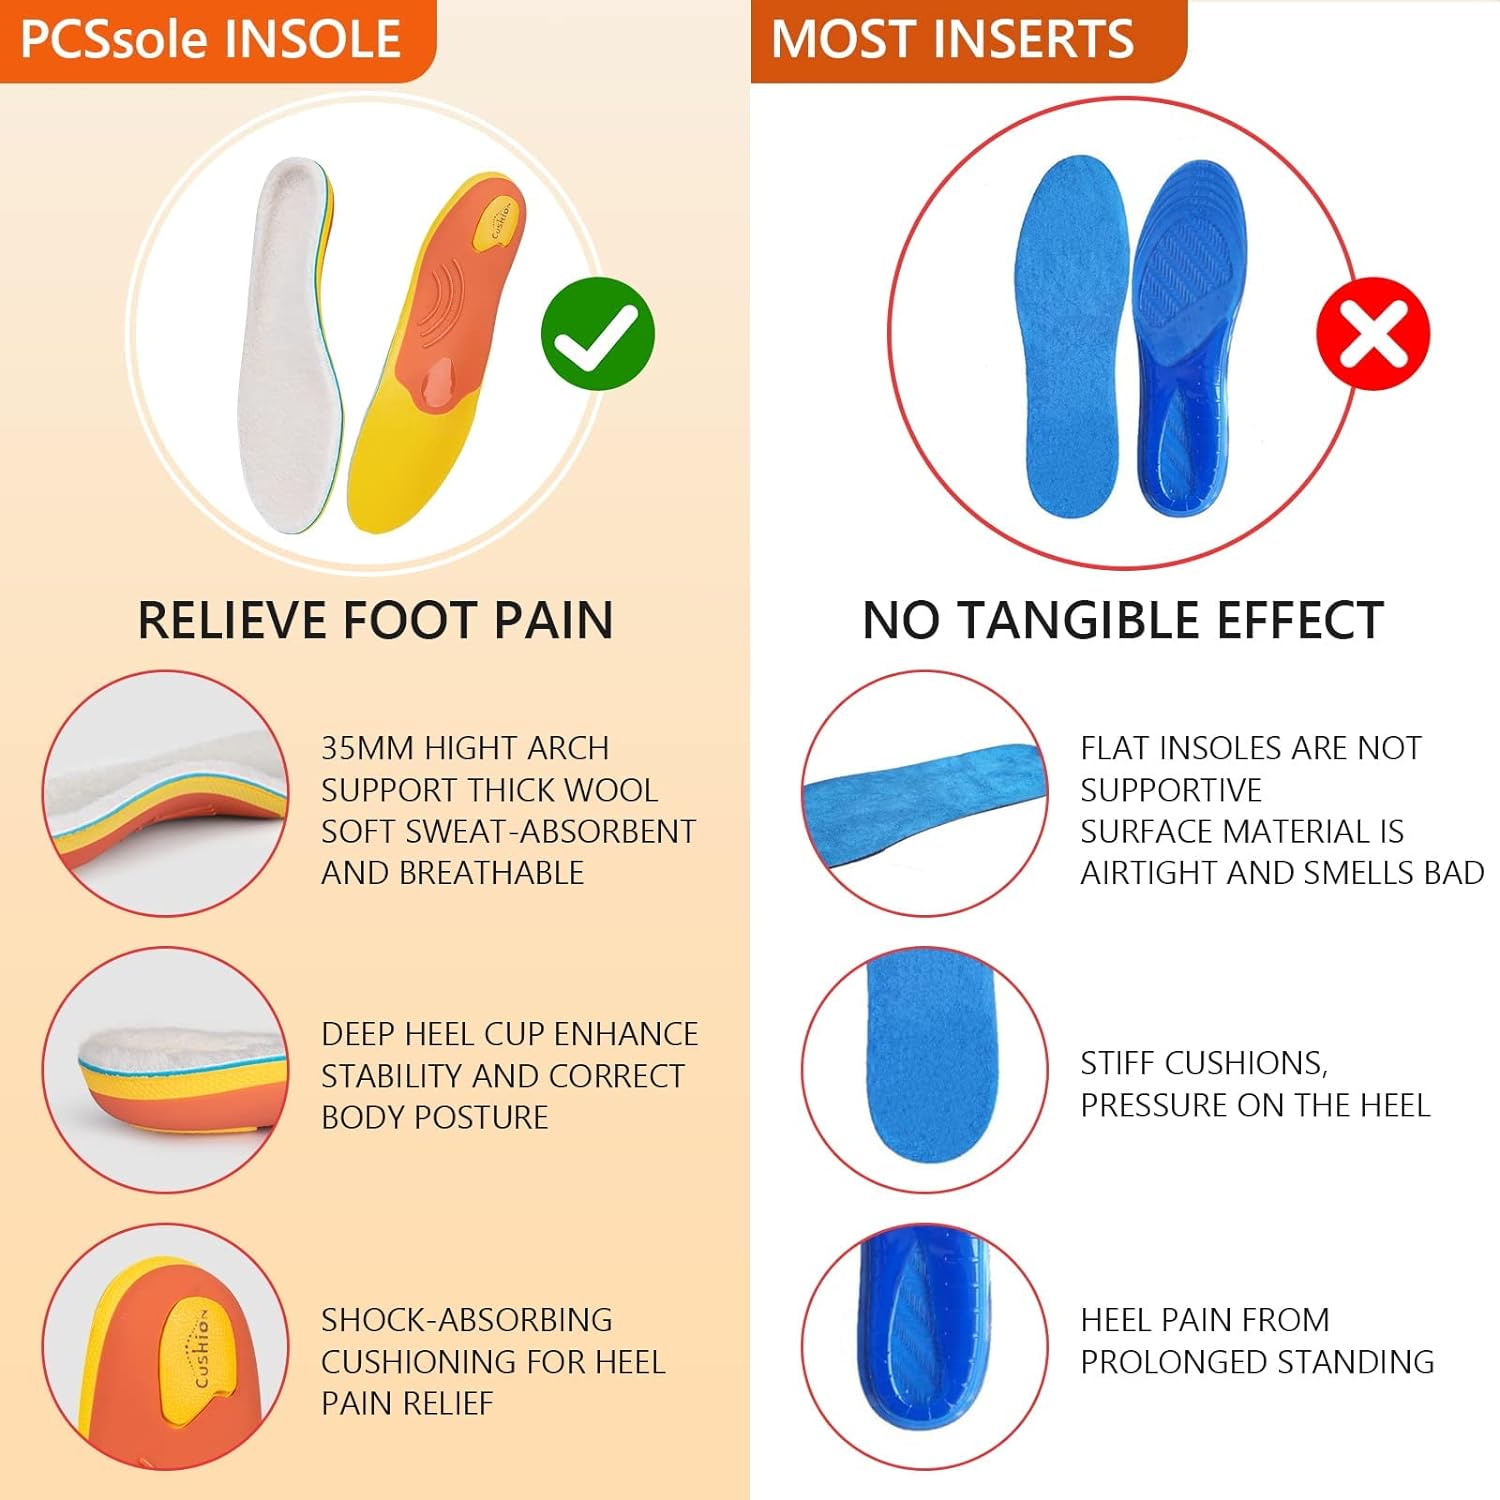 PCSsole Heavy Duty Arch Support Insoles,220+lbs Plantar Fasciitis Orthotic Insoles,Work Boot Shoe Insert for Flat Feet, Heel Pain,Pronation,Foot Pain Relief,Metatarsal Support.26cm Red